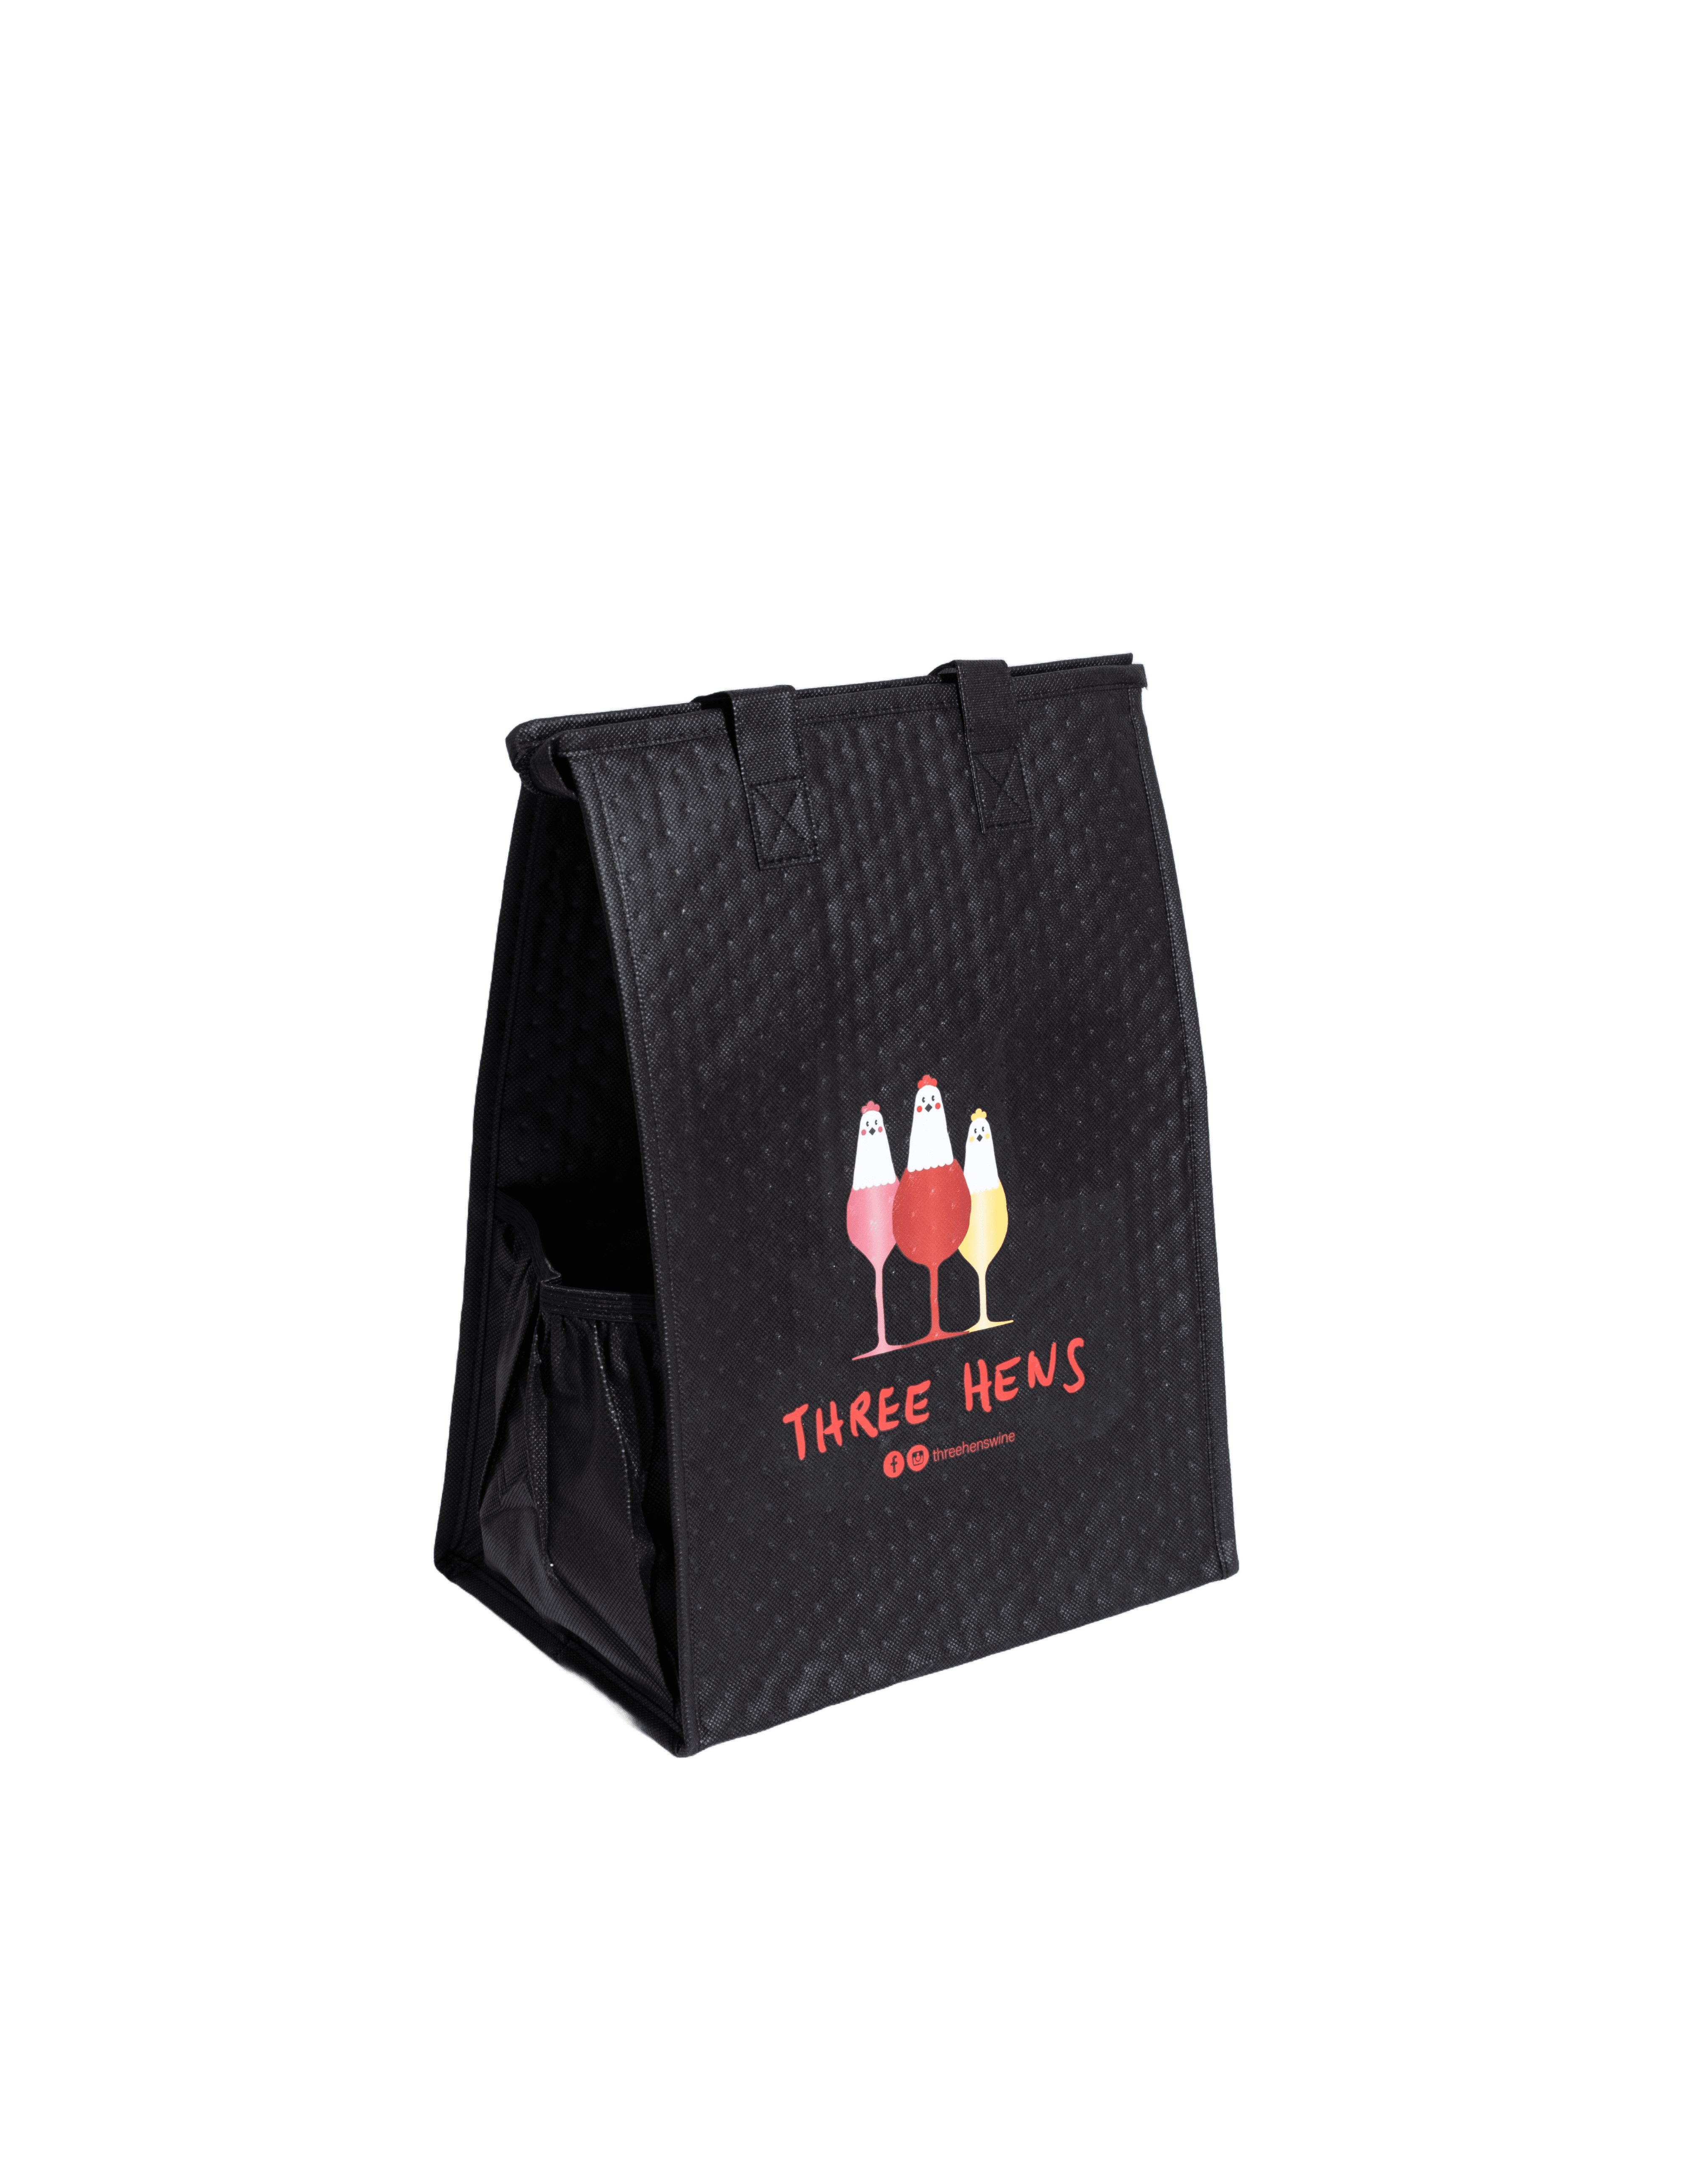 Get (1) Three Hens Thermal Bag (Freebie) for (3) Three Hens Red 750ml or Three Hens White 750ml